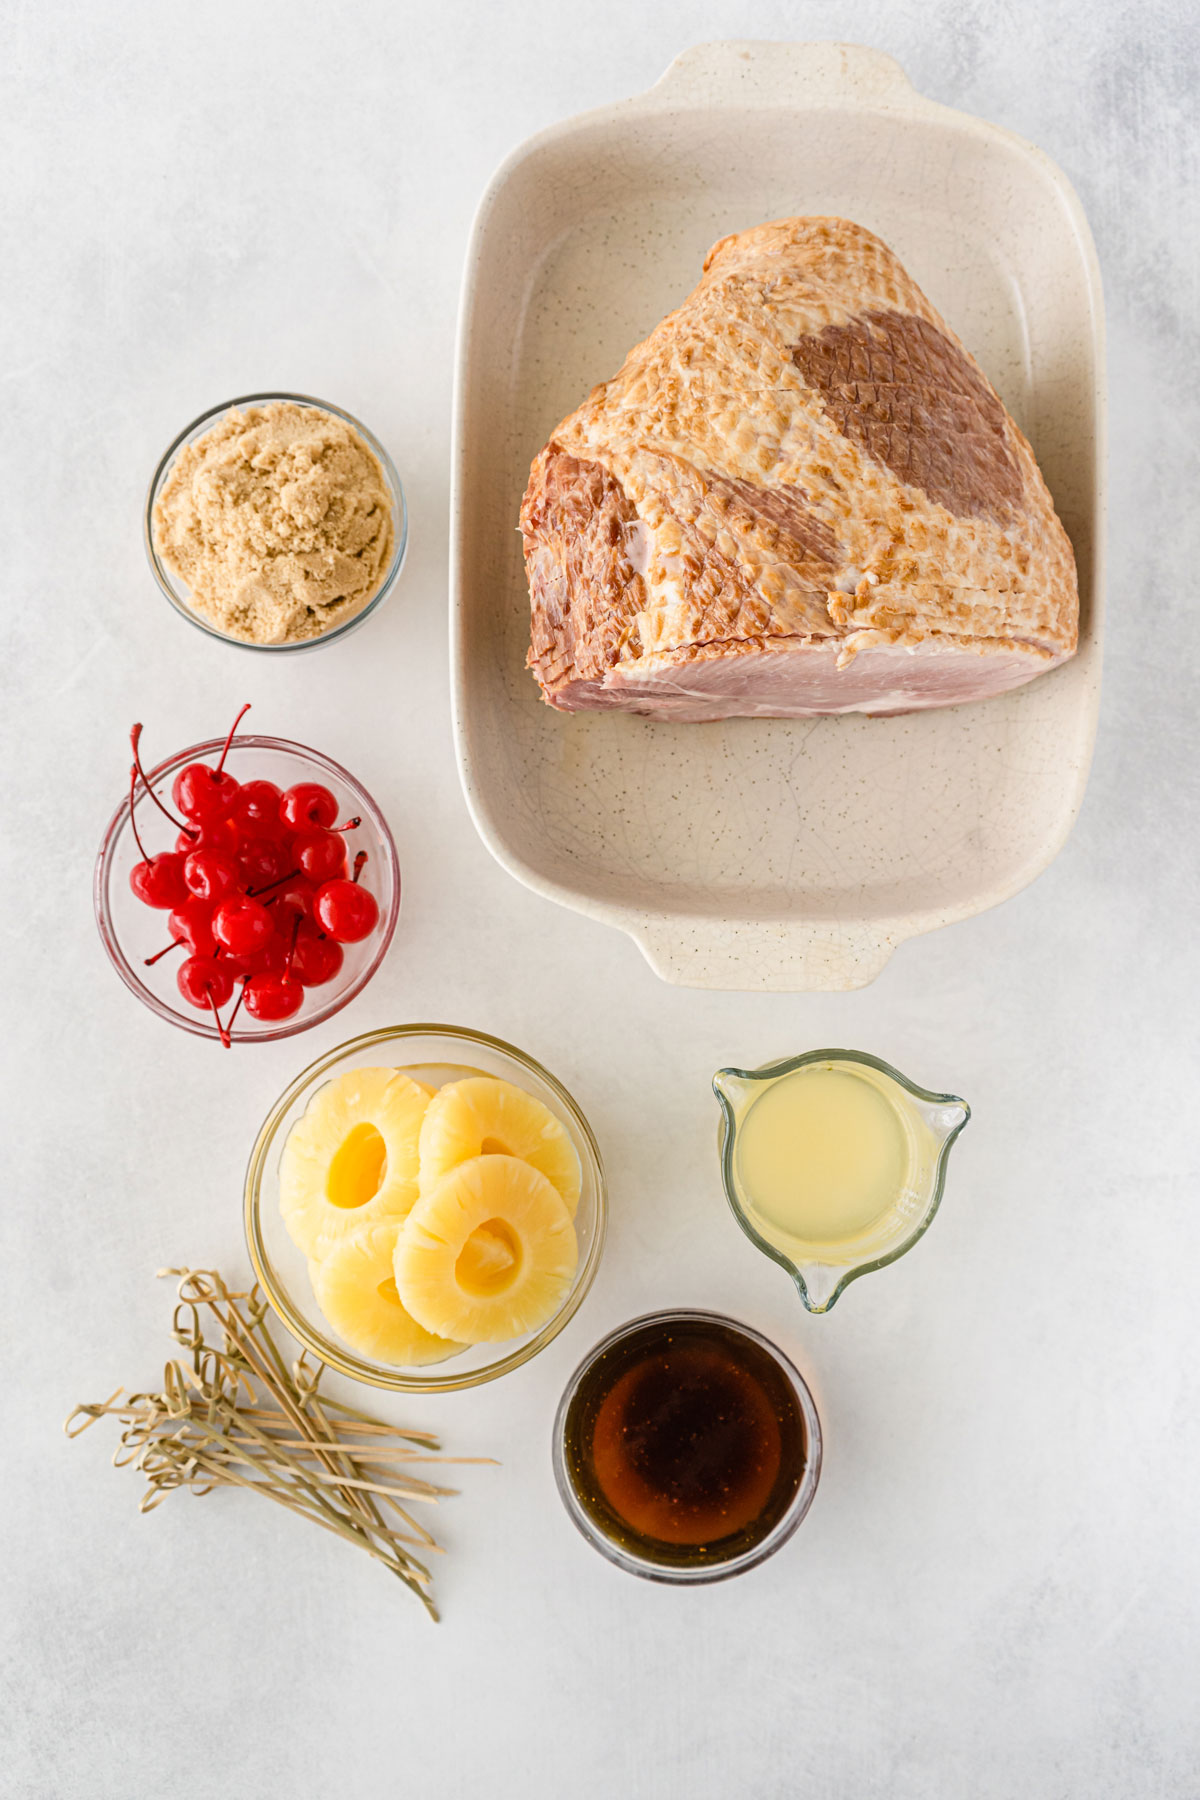 Ingredients for Pineapple Ham with Brown Sugar Marinade. These are the following: ham, pineapple rings, maraschino cherries, 1/2 cup honey, 1/2 cup brown sugar, and 1 cup reserved pineapple juice.
